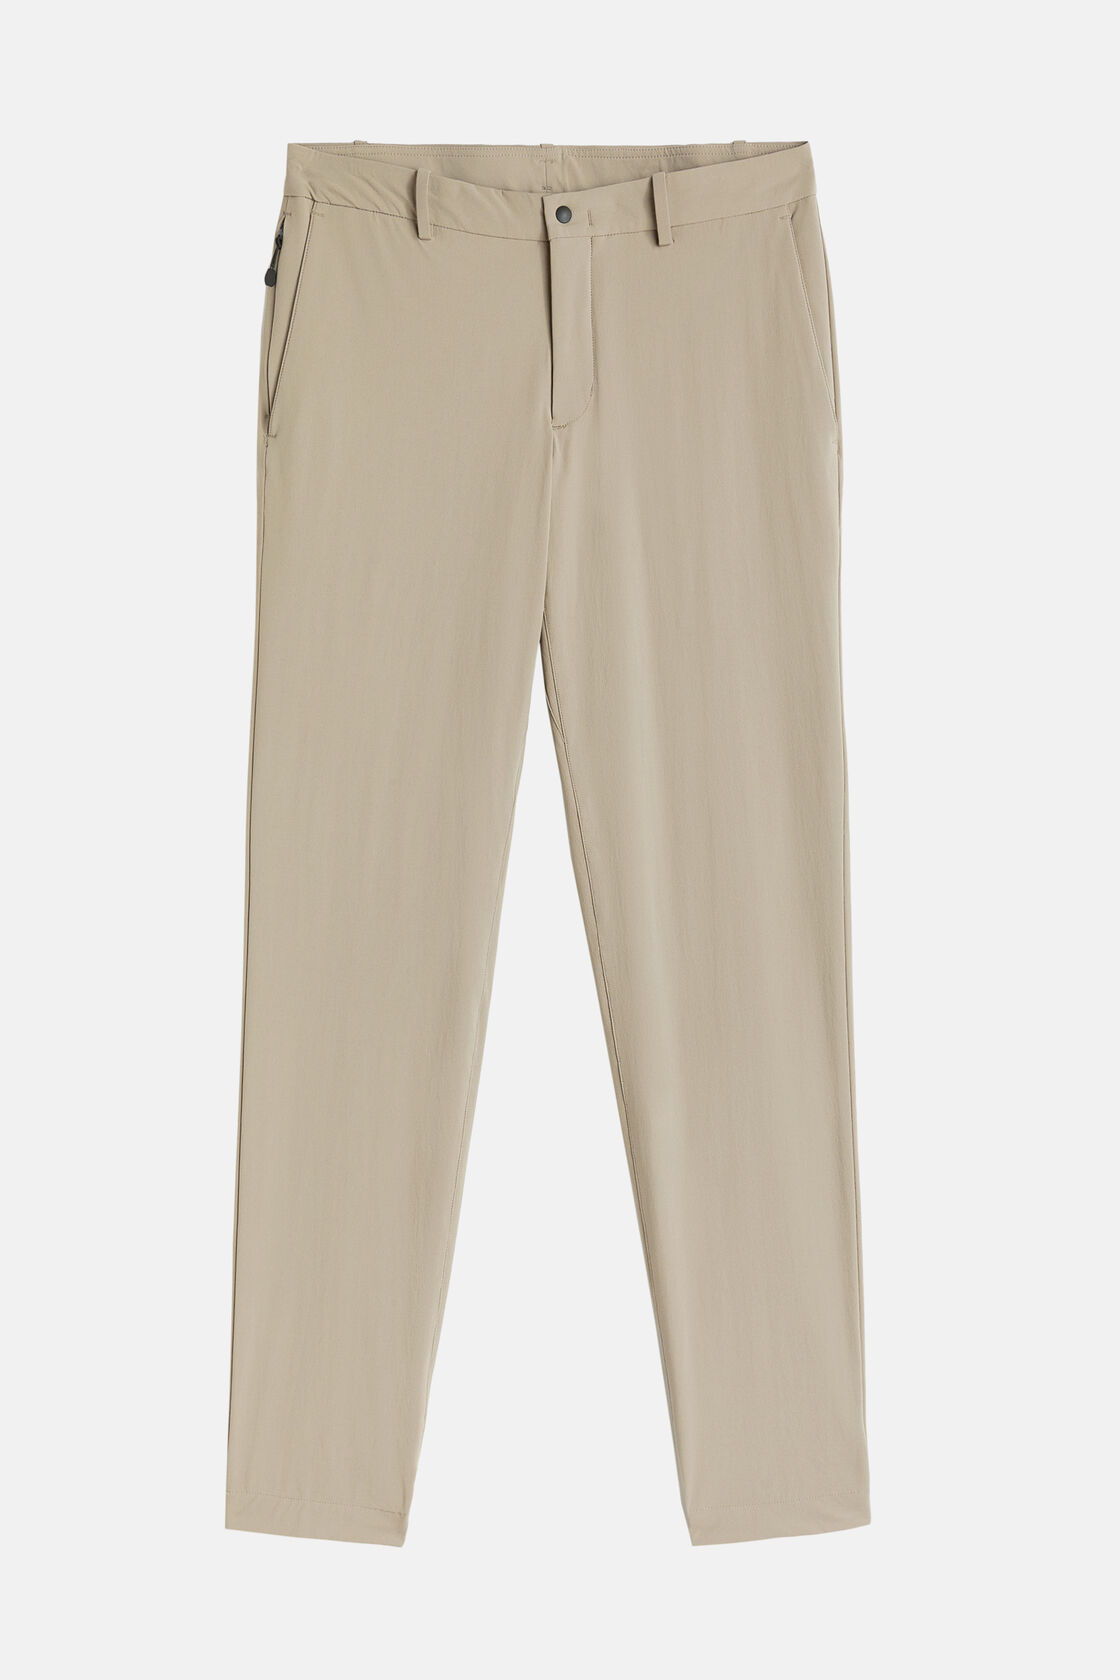 B-tech recycled stretch nylon trousers, Beige, hi-res